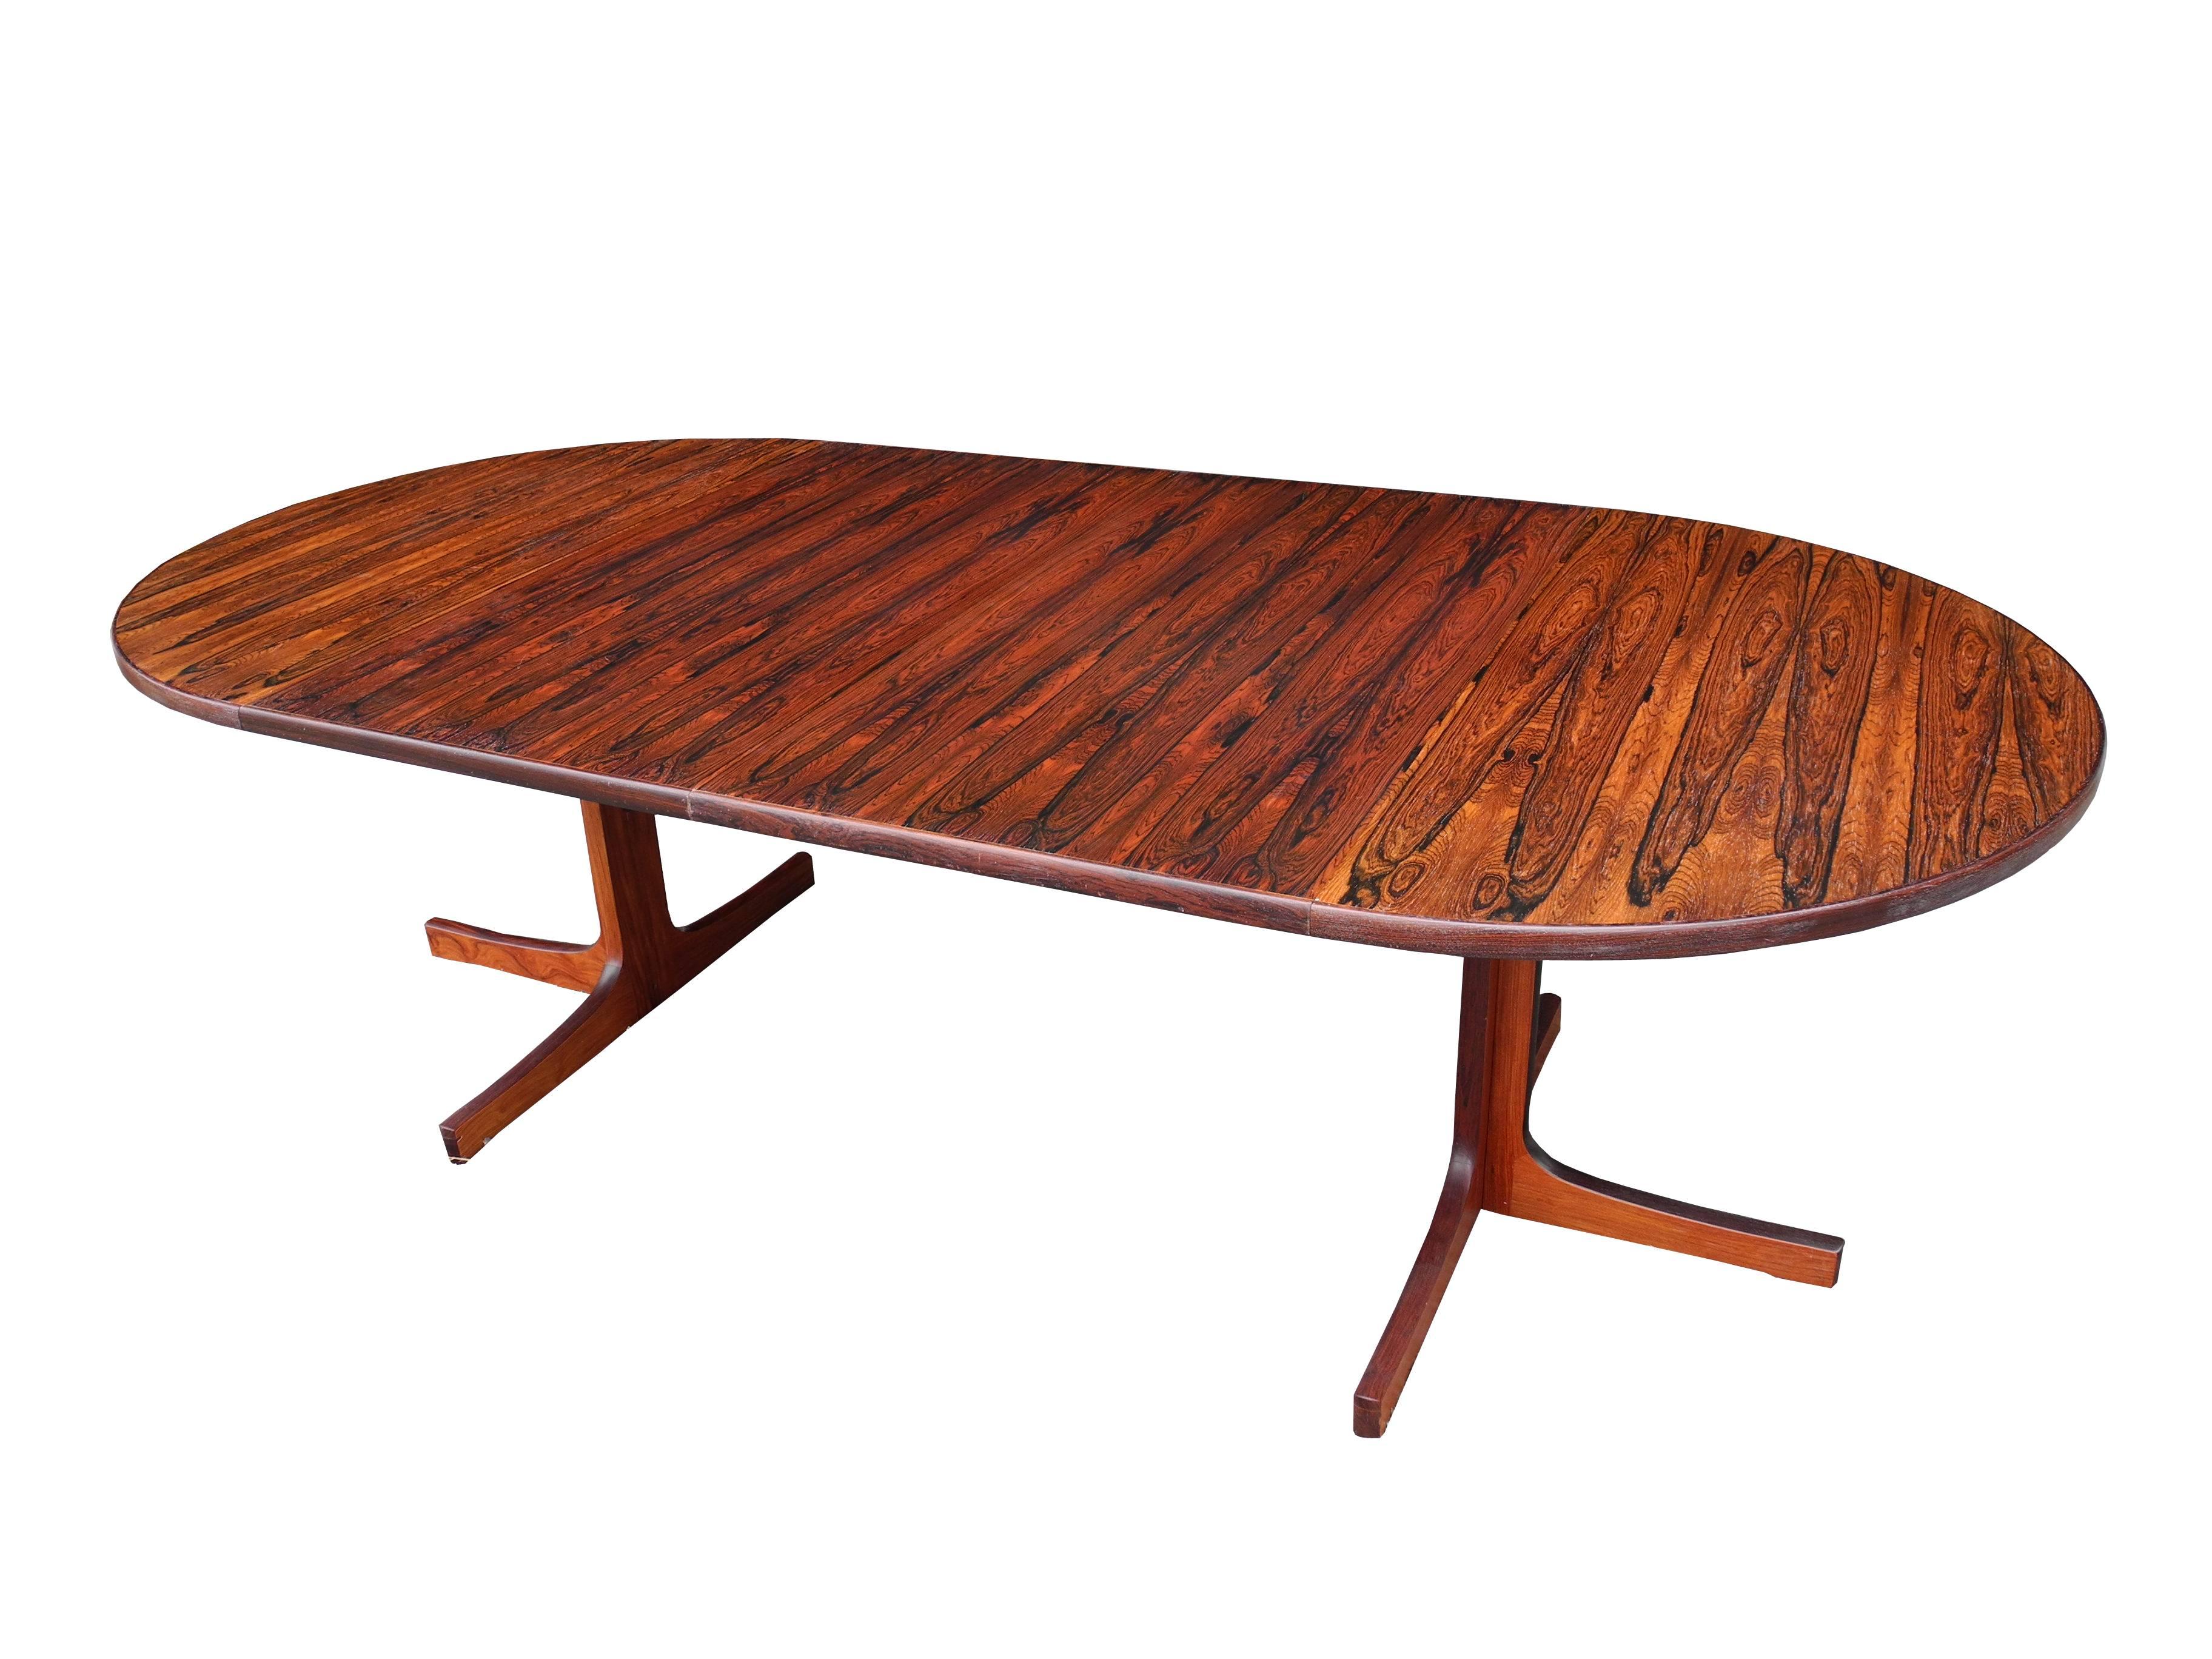 This rosewood dining table was made in Denmark by Niels O Møller in the 1960s. The table has two extension leaves. Closed it is a 48